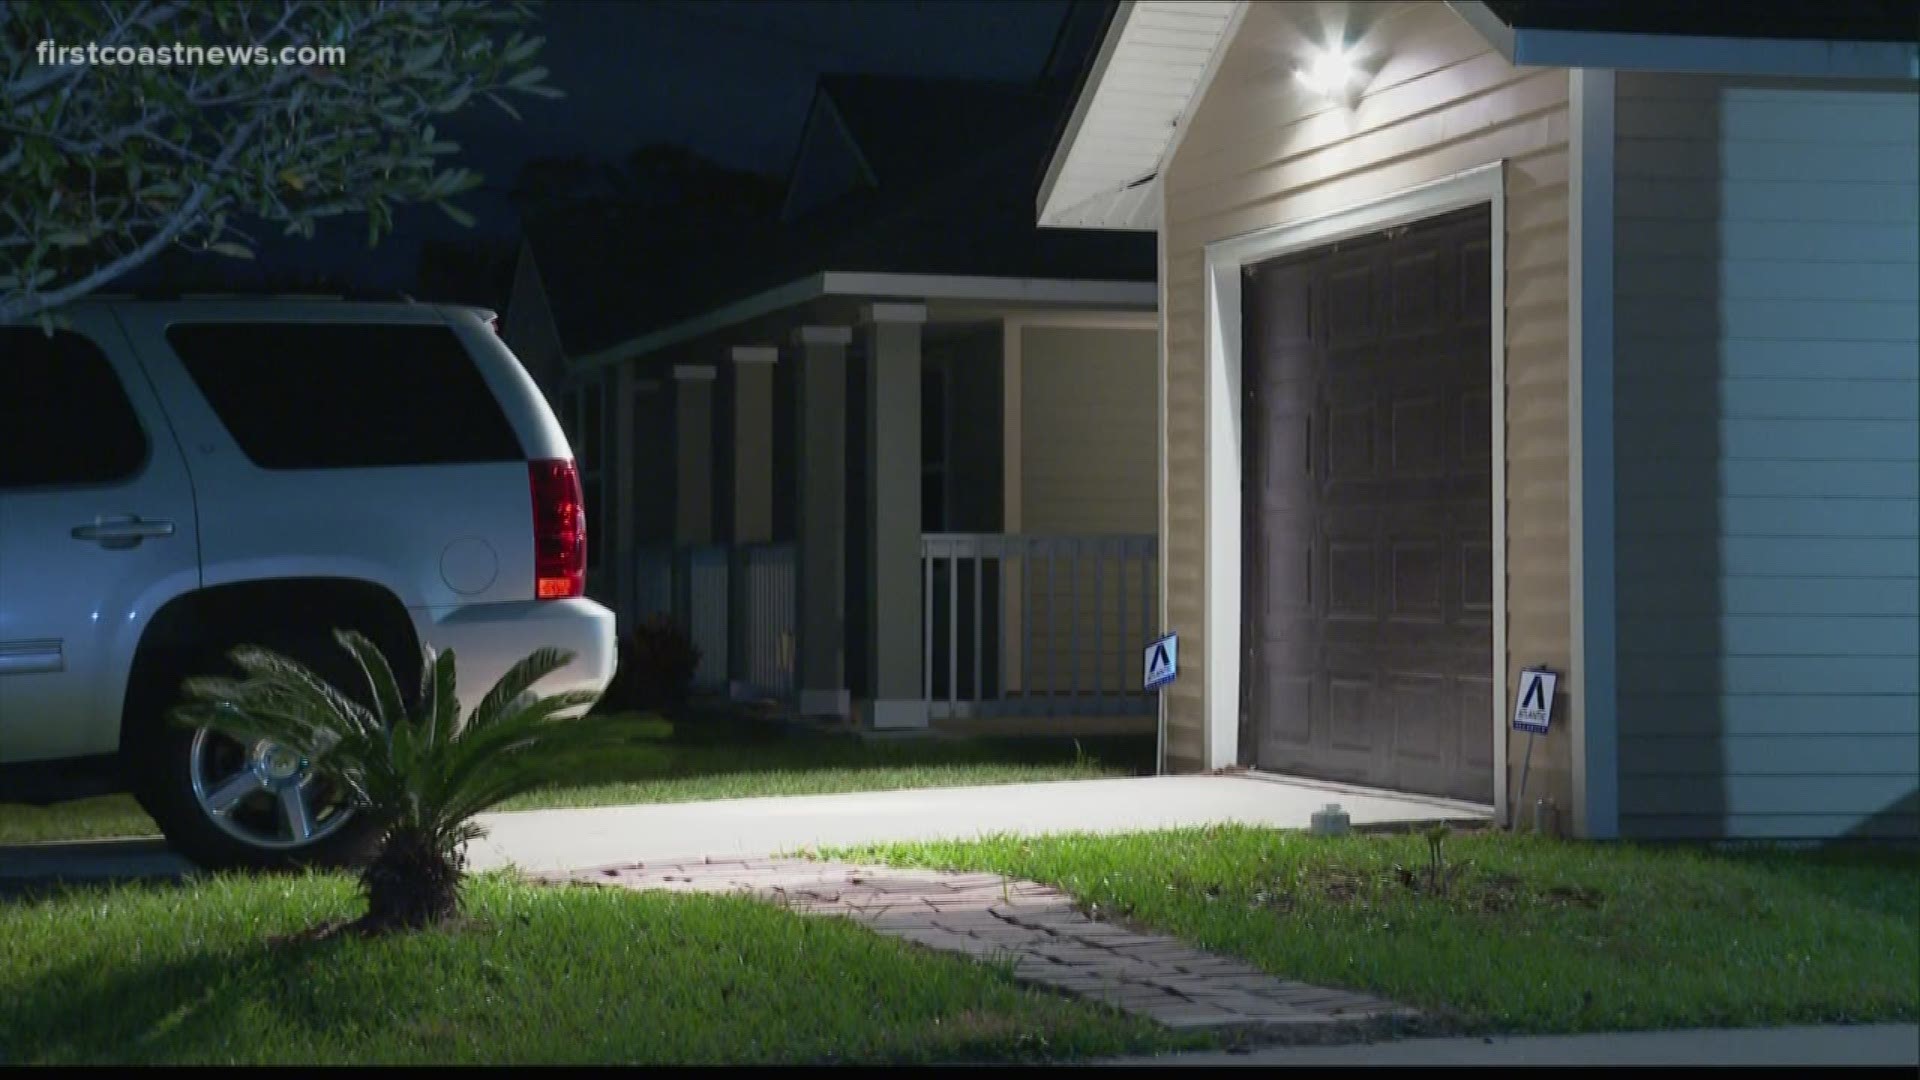 The homes in a Jacksonville community were supposed to be an answer to prayers, but many families there say the houses have only brought them pain.